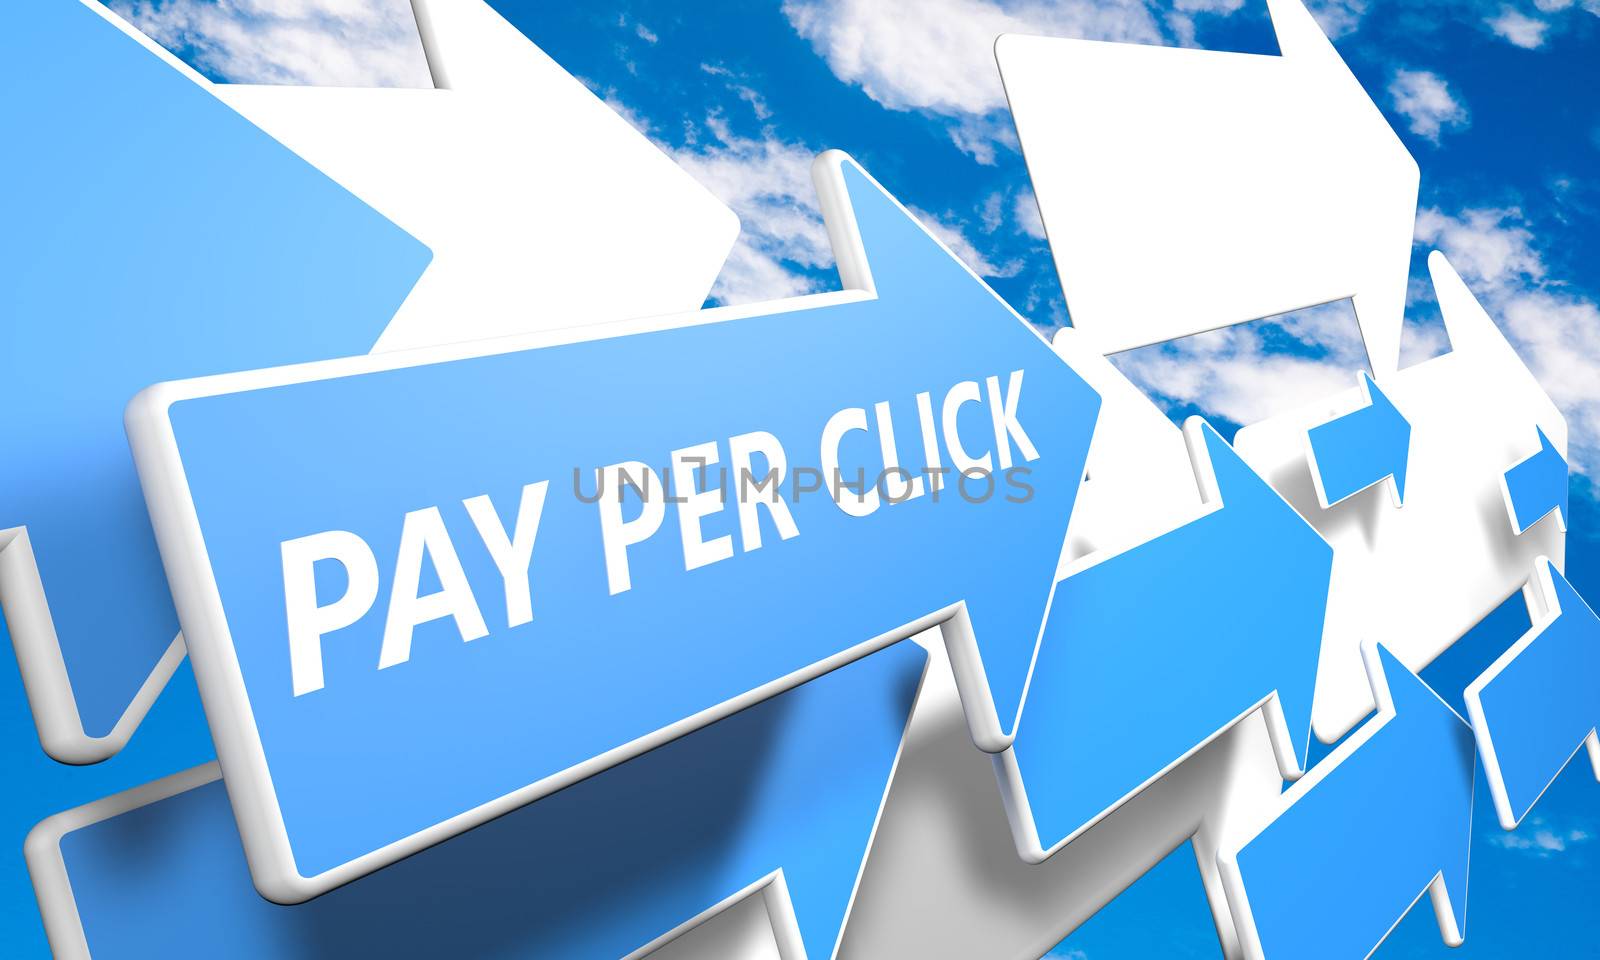 Pay per Click 3d render concept with blue and white arrows flying upwards in a blue sky with clouds